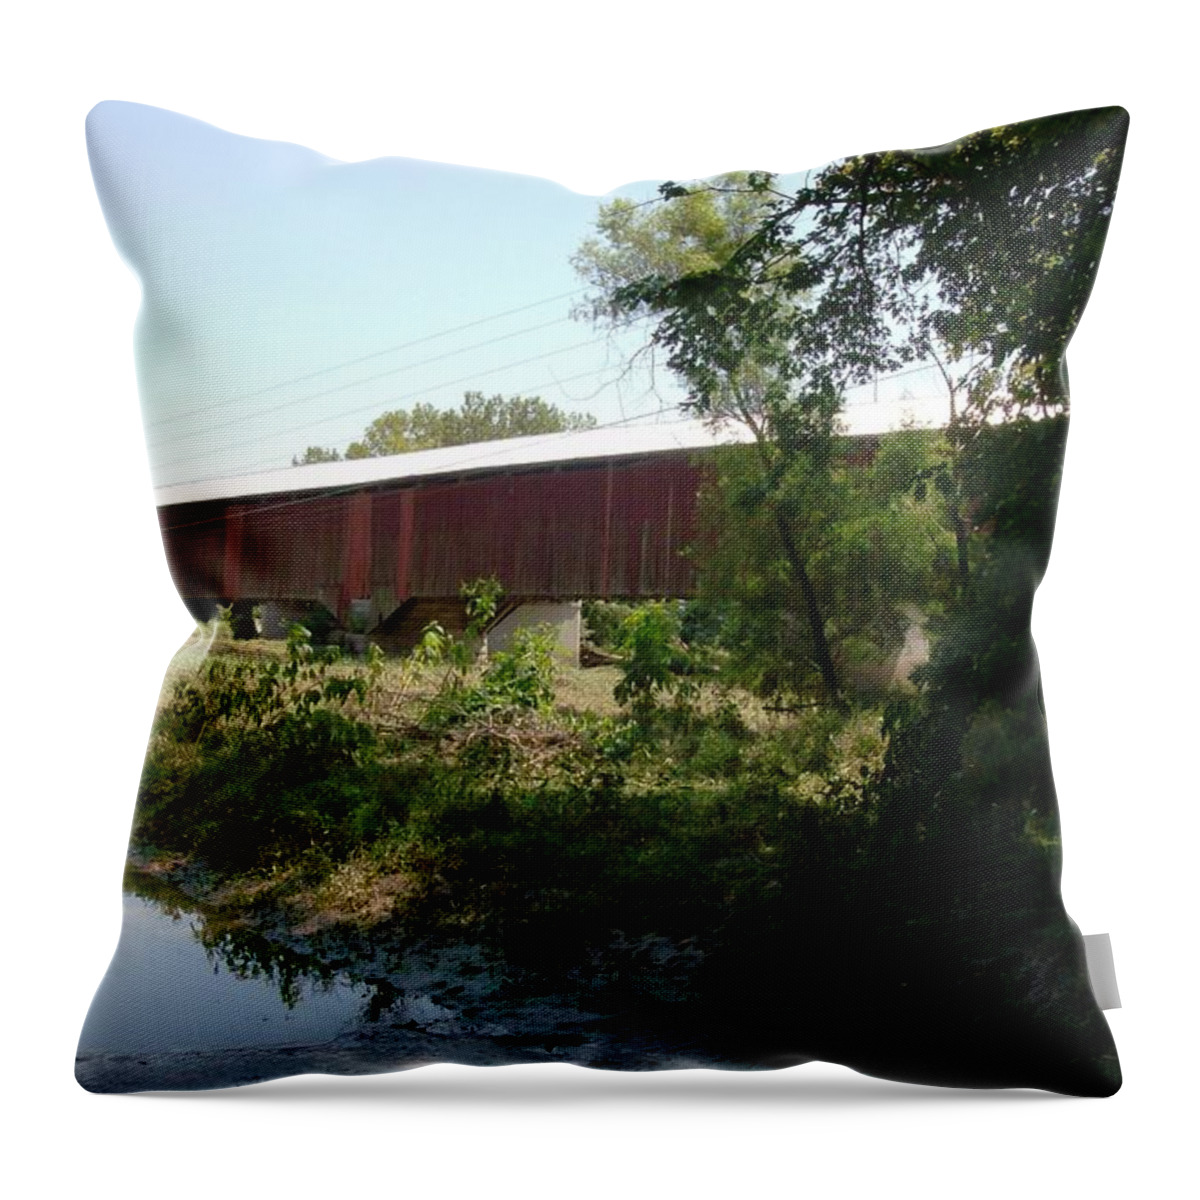 Landscape Throw Pillow featuring the photograph Red Covered Bridge by Fortunate Findings Shirley Dickerson